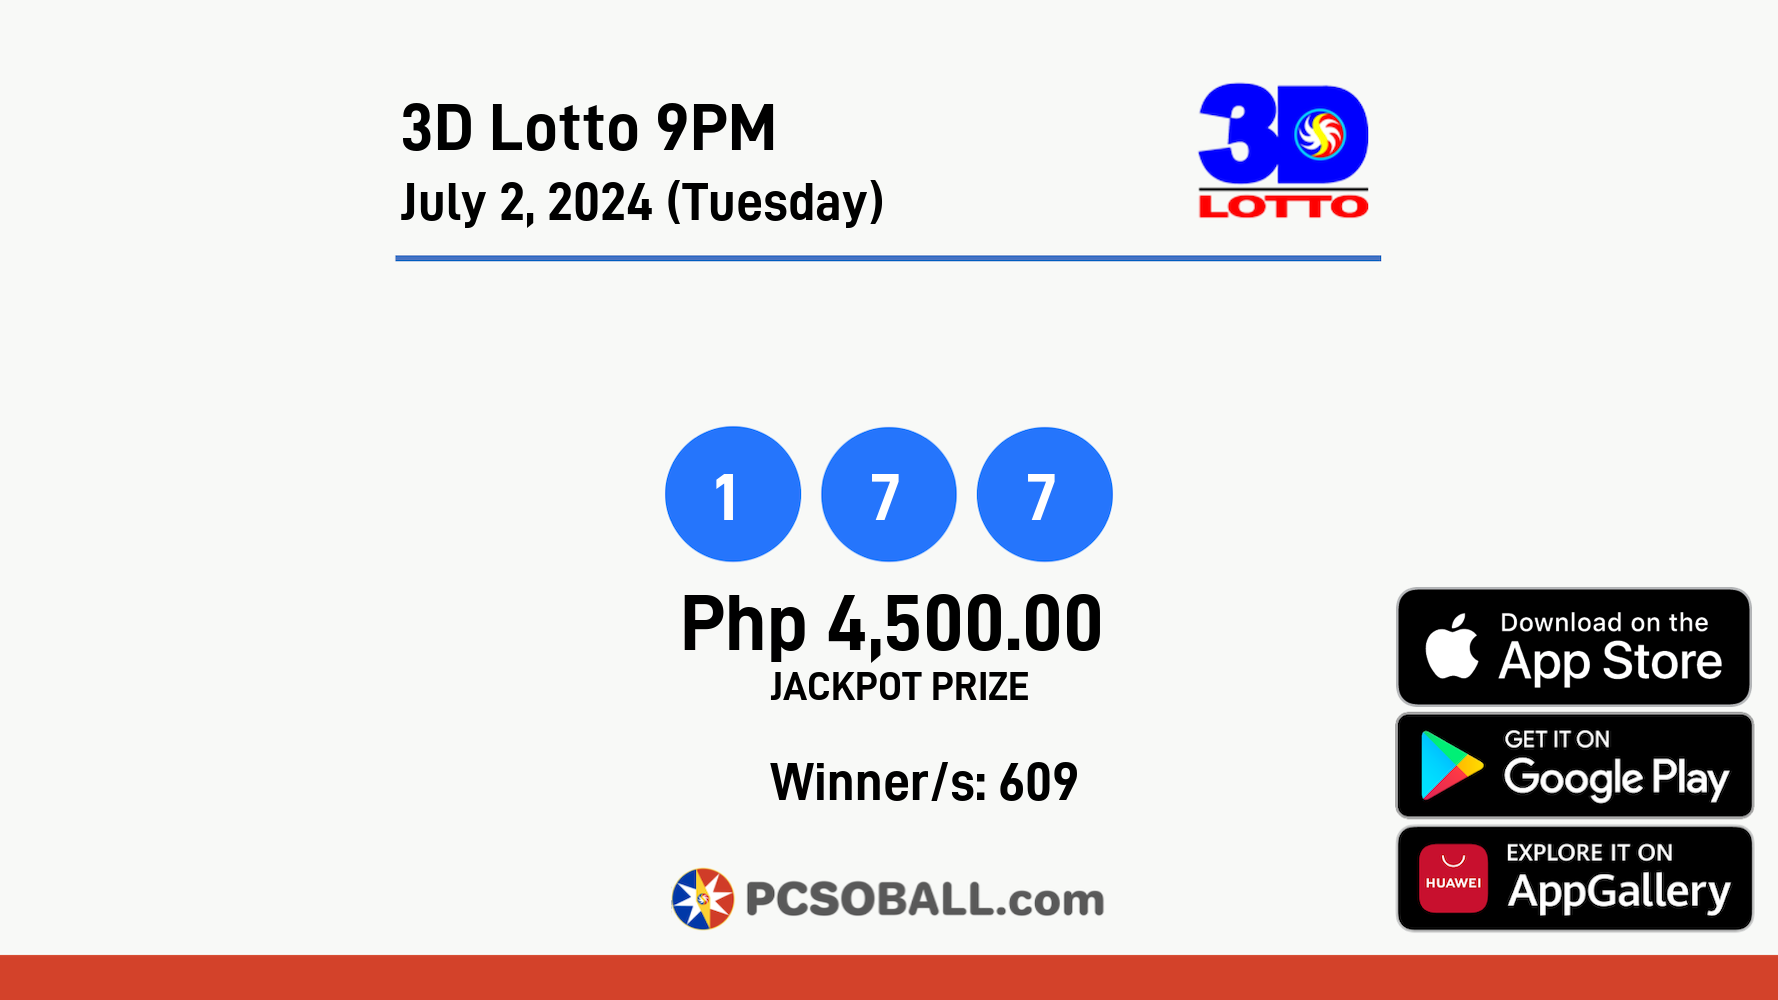 3D Lotto 9PM July 2, 2024 (Tuesday) Result